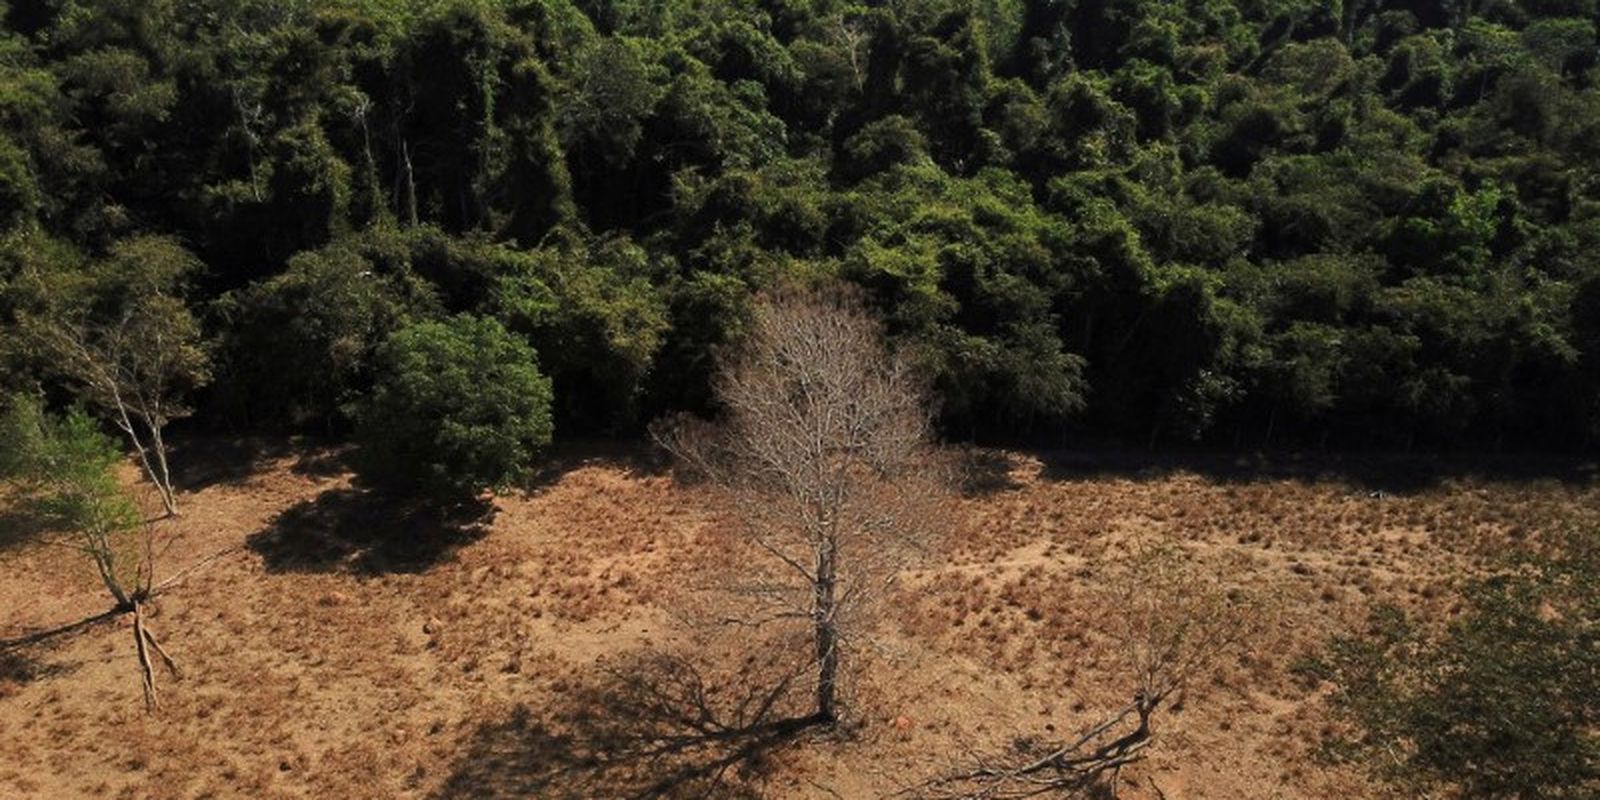 Combating deforestation is a priority to mitigate climate change